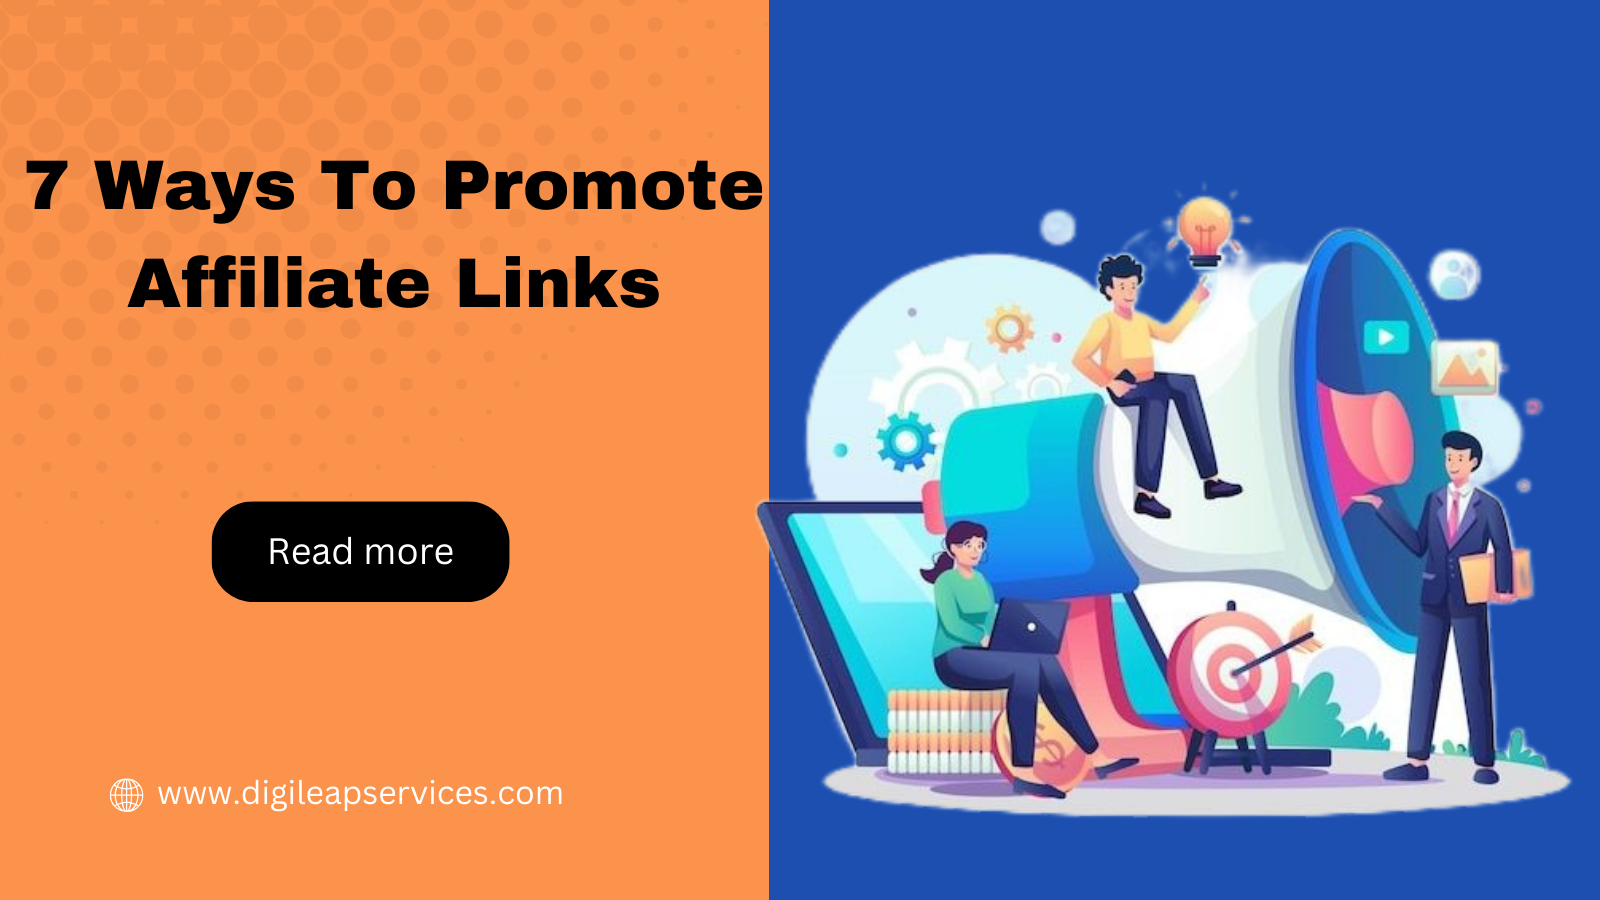 7 Ways To Promote Affiliate Links